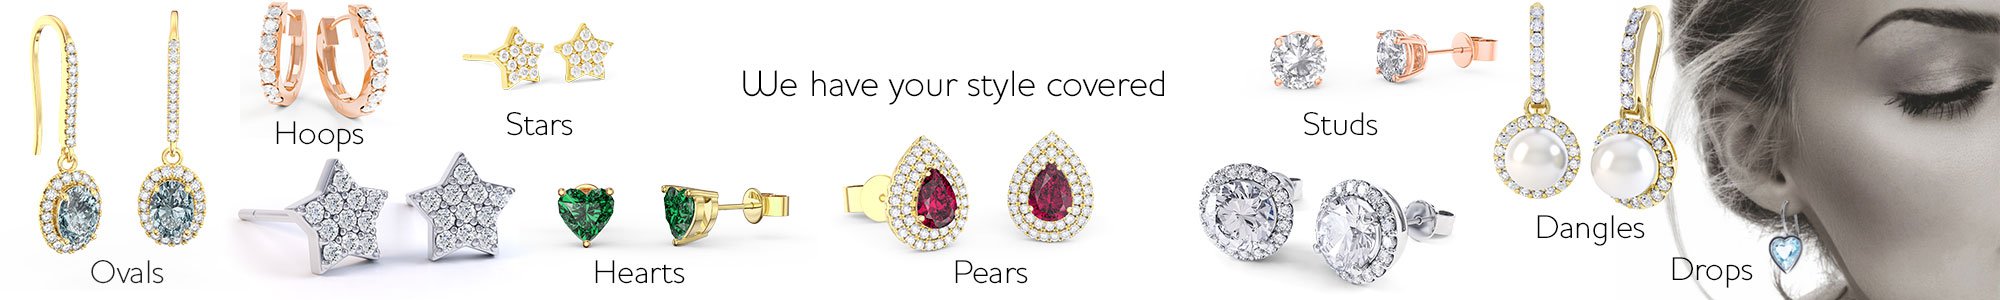 Shop Earrings by Jian London. Stunning gifts for your Bridesmaids. Free US Delivery